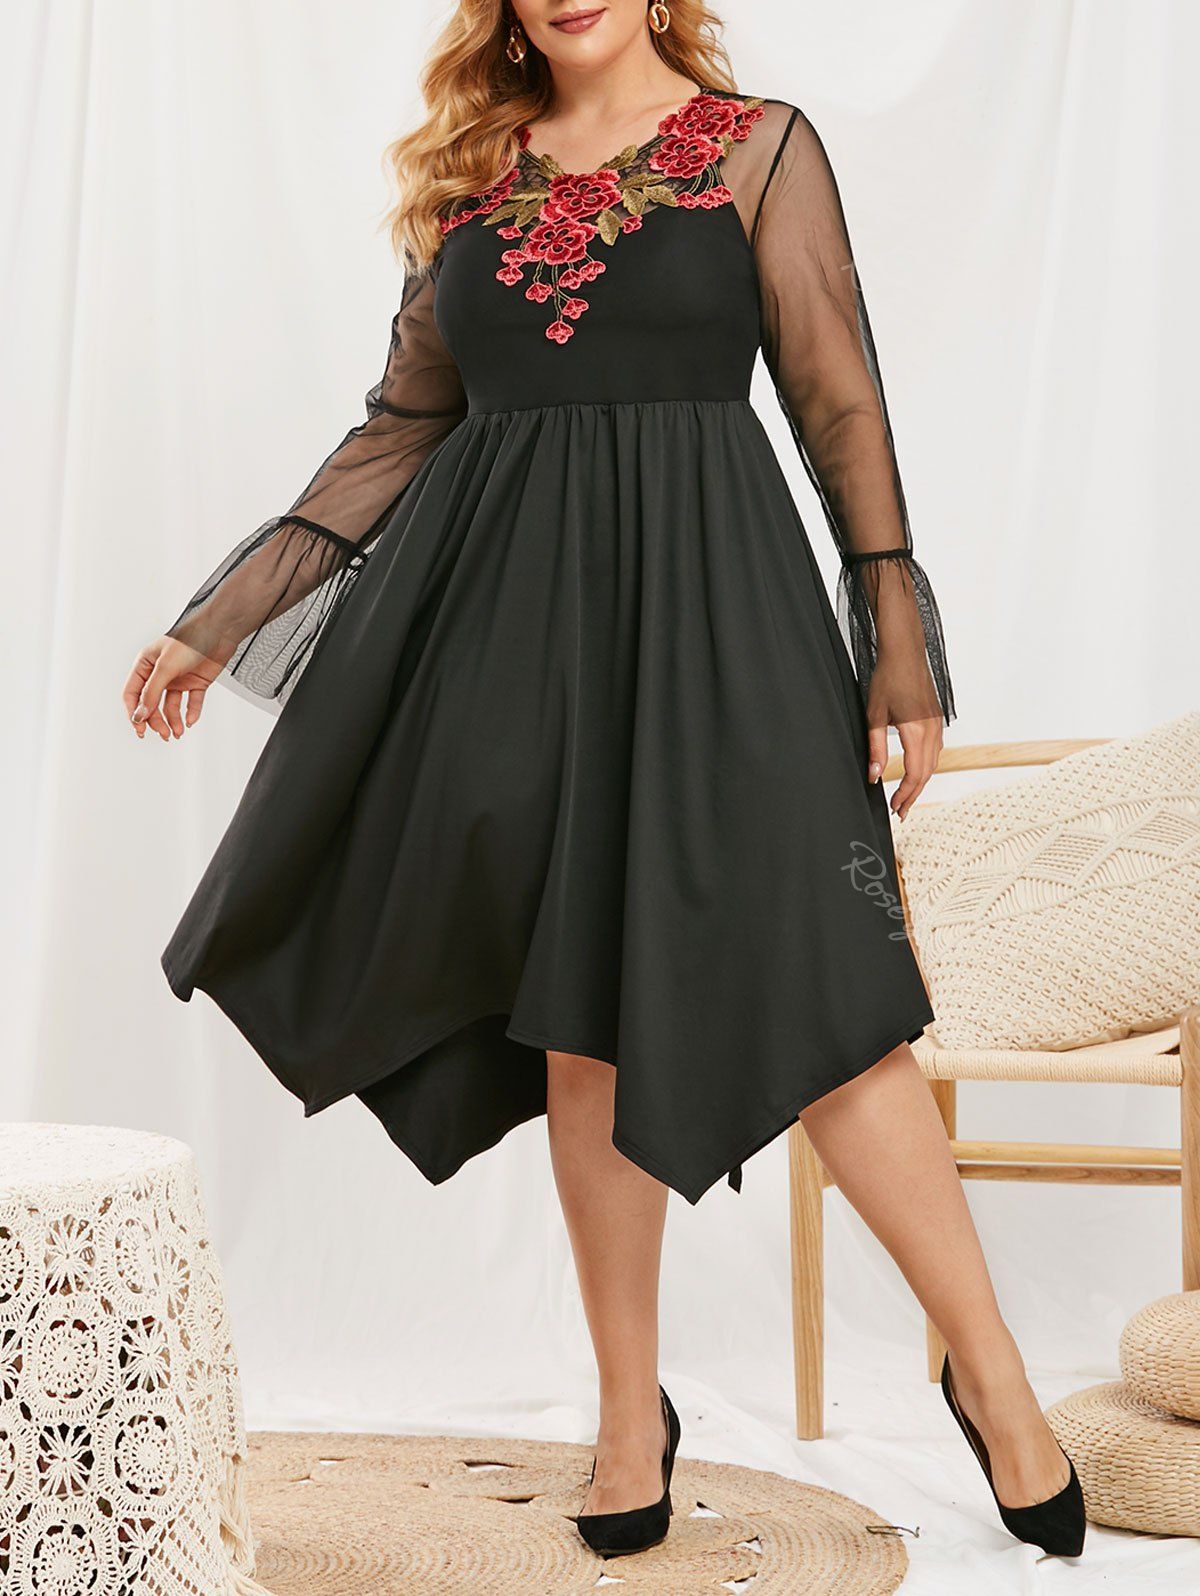 Trendy Plus Size Flower Applique Lace Flare Sleeve Dress with Camisole  